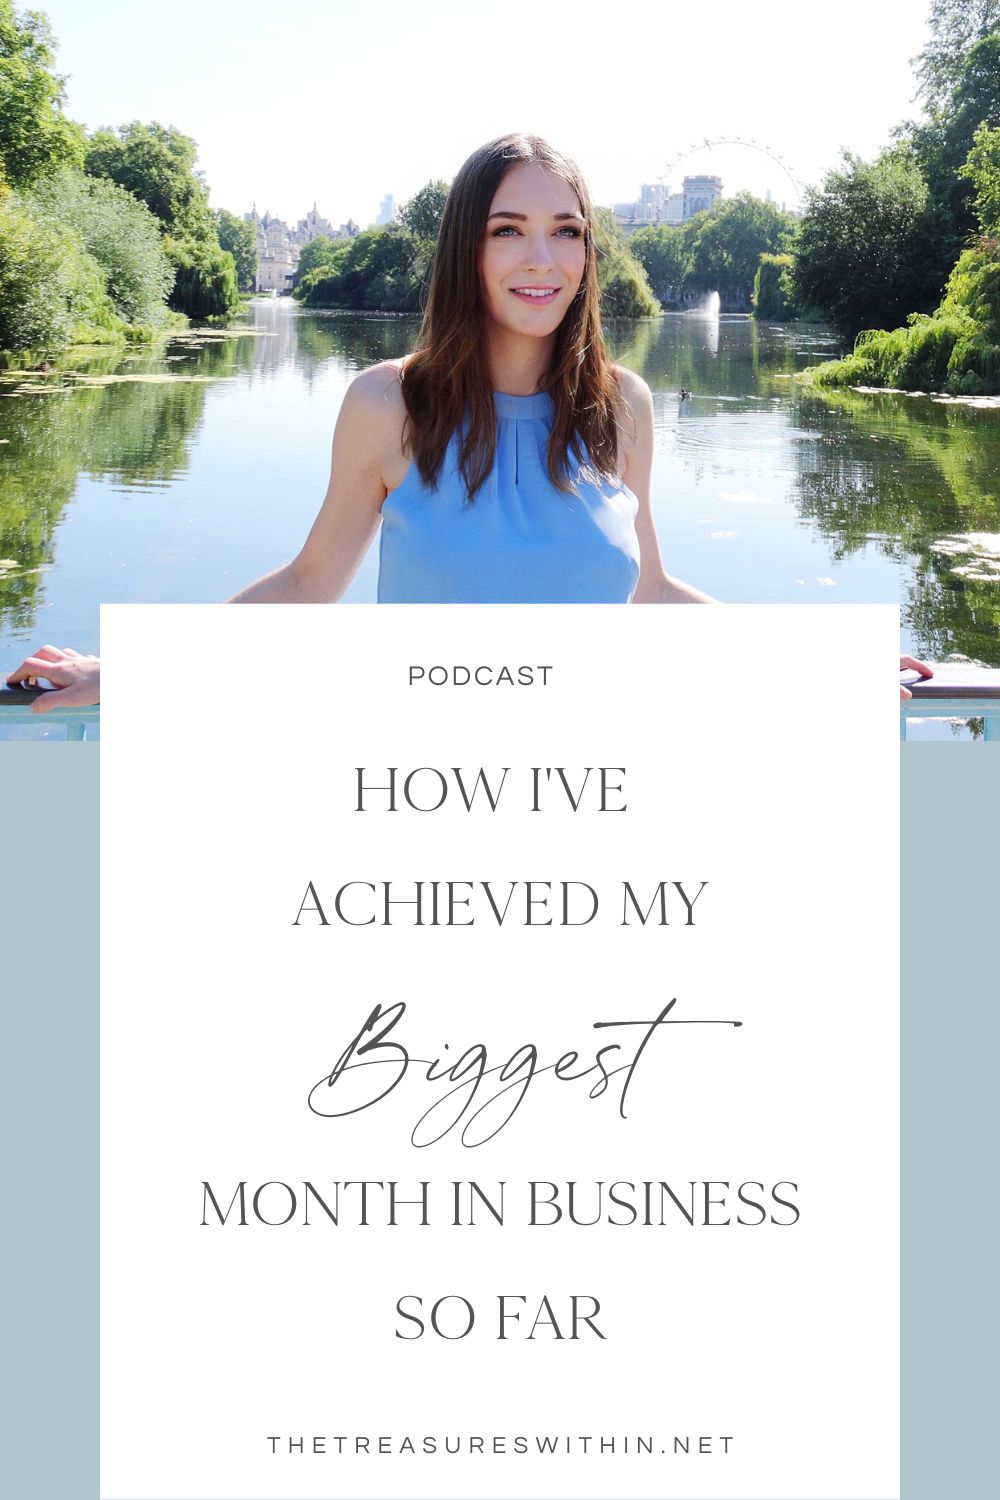 Biggest business month podcast